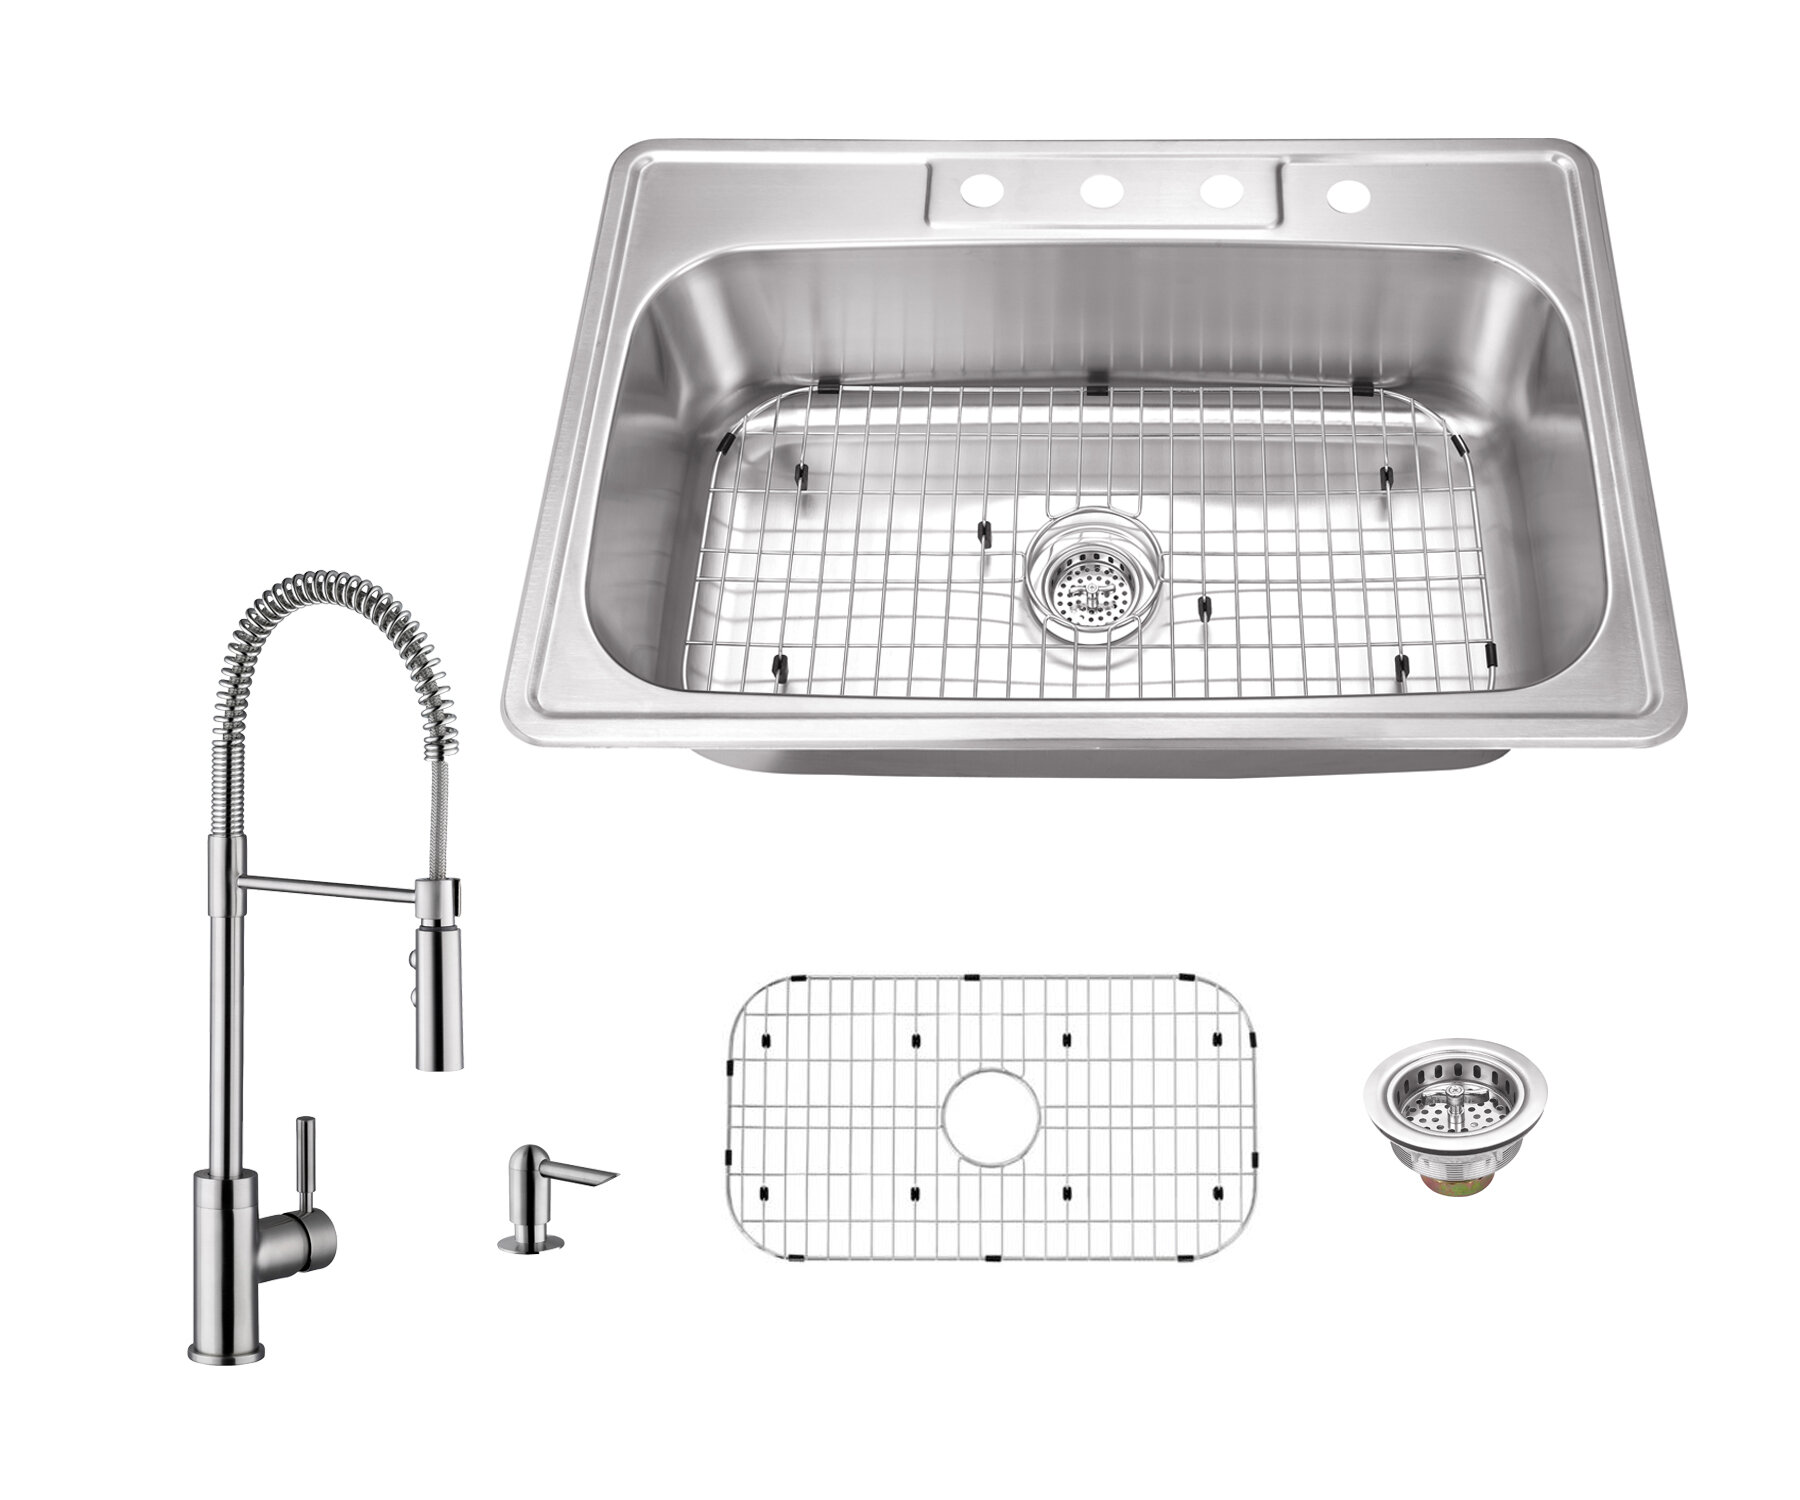 20 Gauge Stainless Steel 33 L X 22 W Drop In Kitchen Sink With Faucet